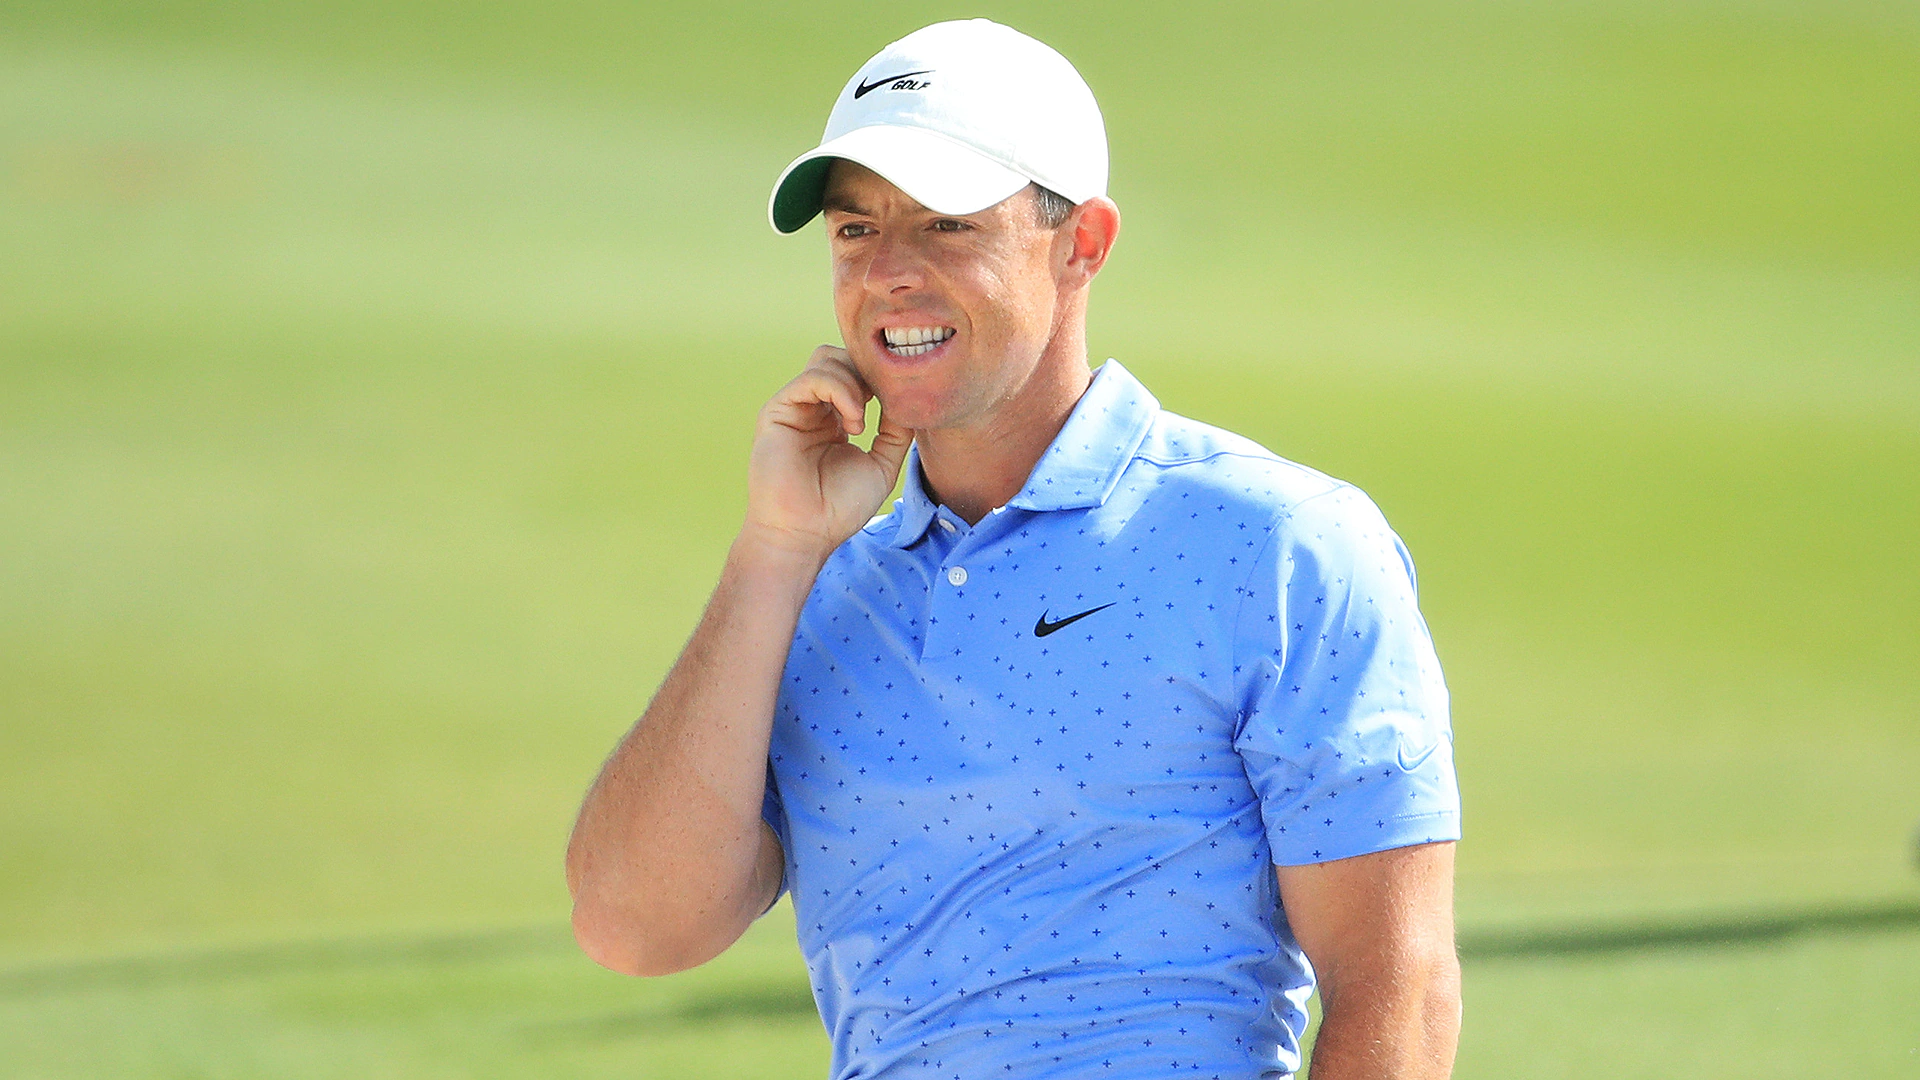 Rory McIlroy rips Distance Report as ‘huge waste’ of time, money